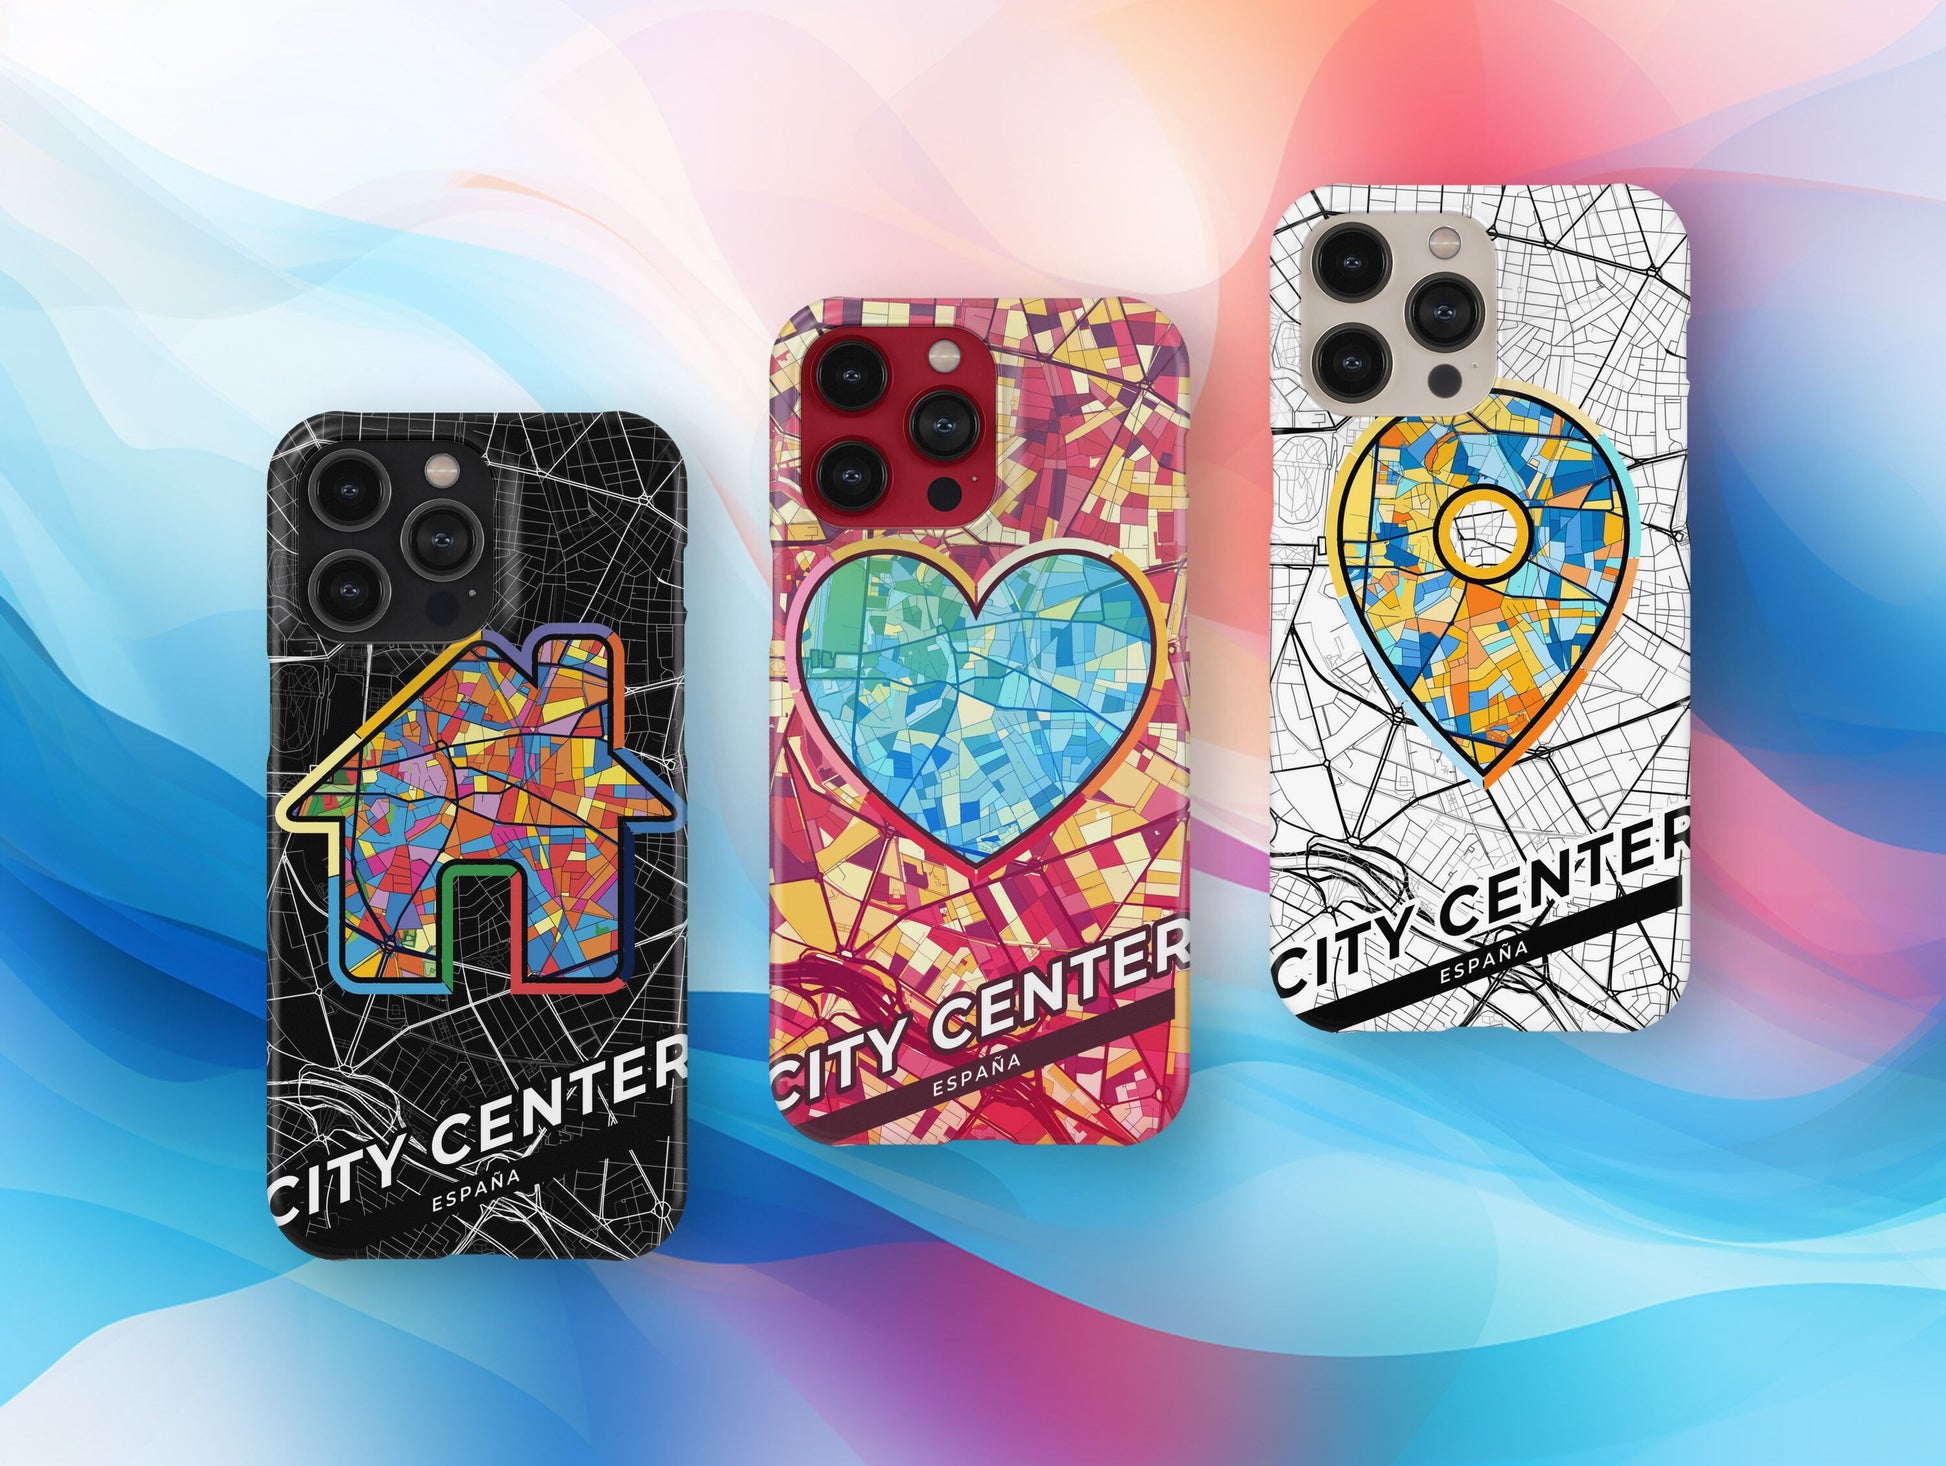 City Center Spain slim phone case with colorful icon. Birthday, wedding or housewarming gift. Couple match cases.